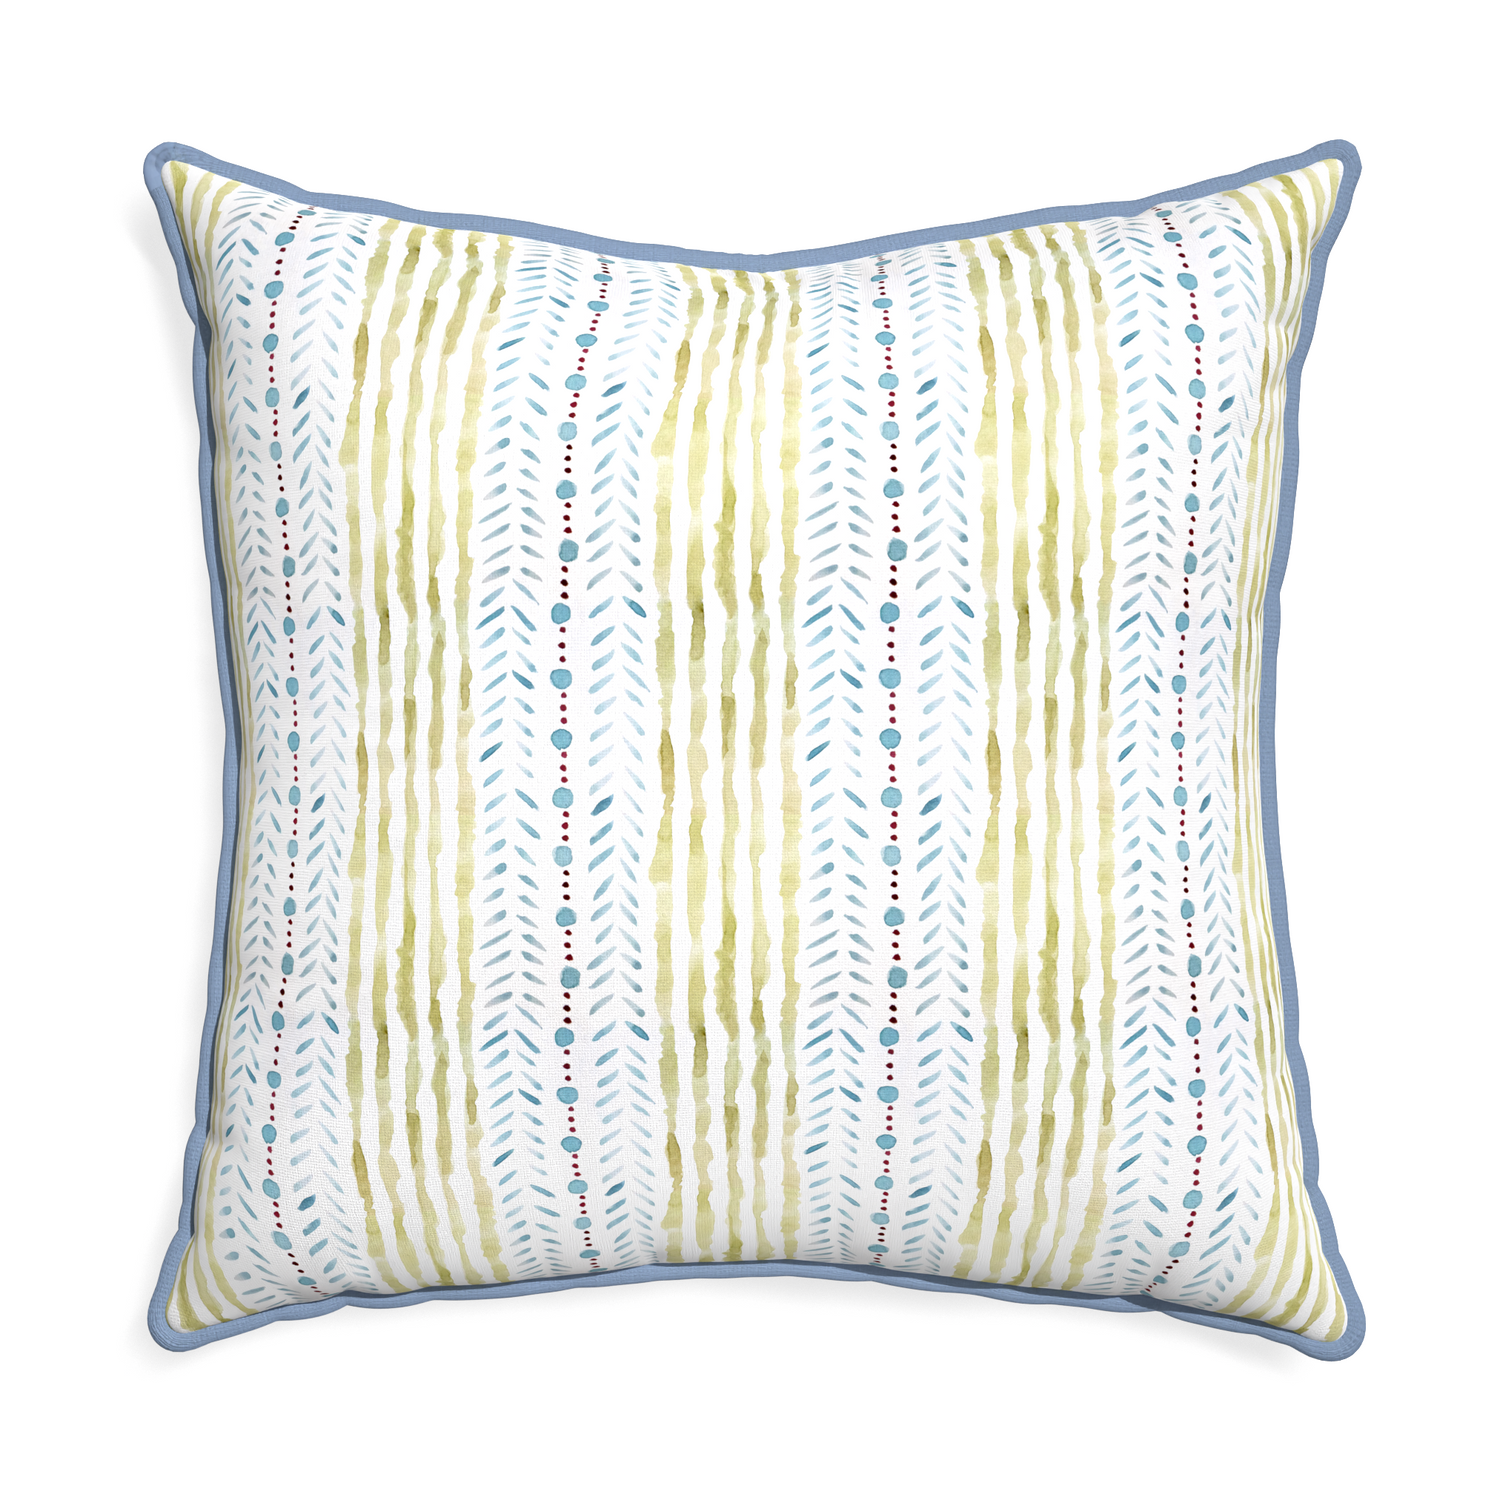 Euro-sham julia custom blue & green stripedpillow with sky piping on white background